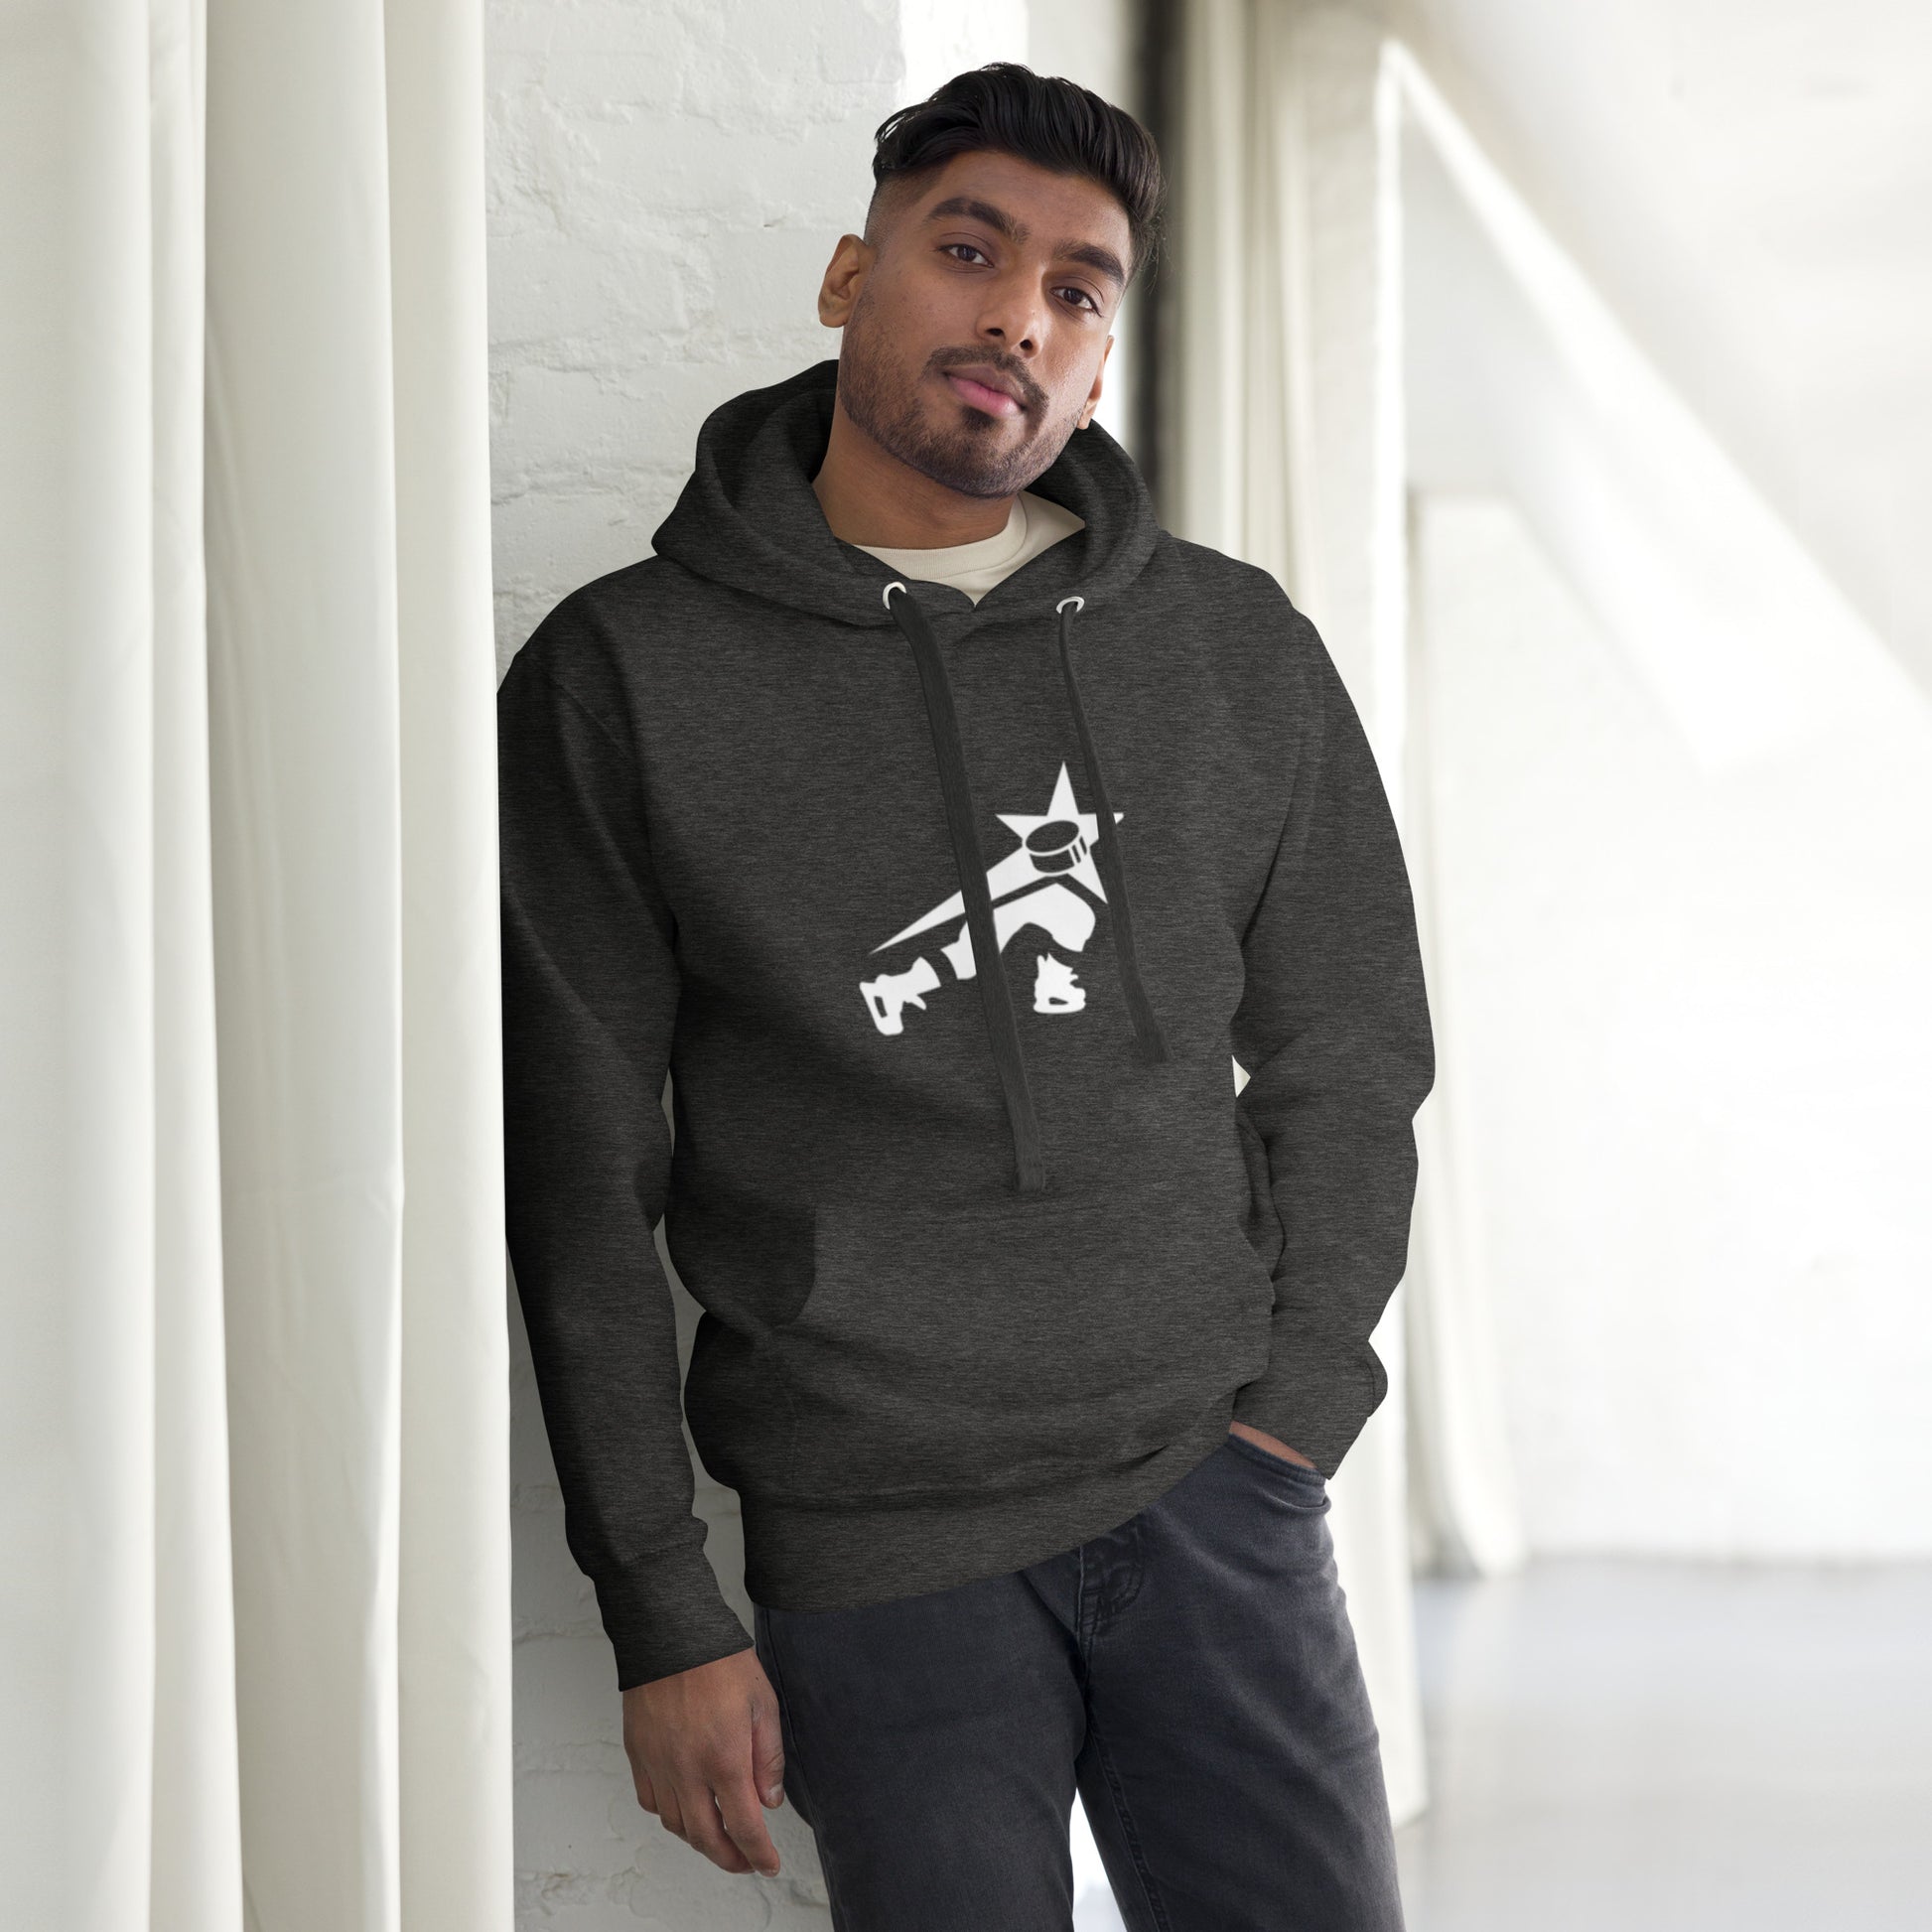 Confident man wearing a dark heather gray hoodie with a white stylized character graphic, leaning against a white brick wall.